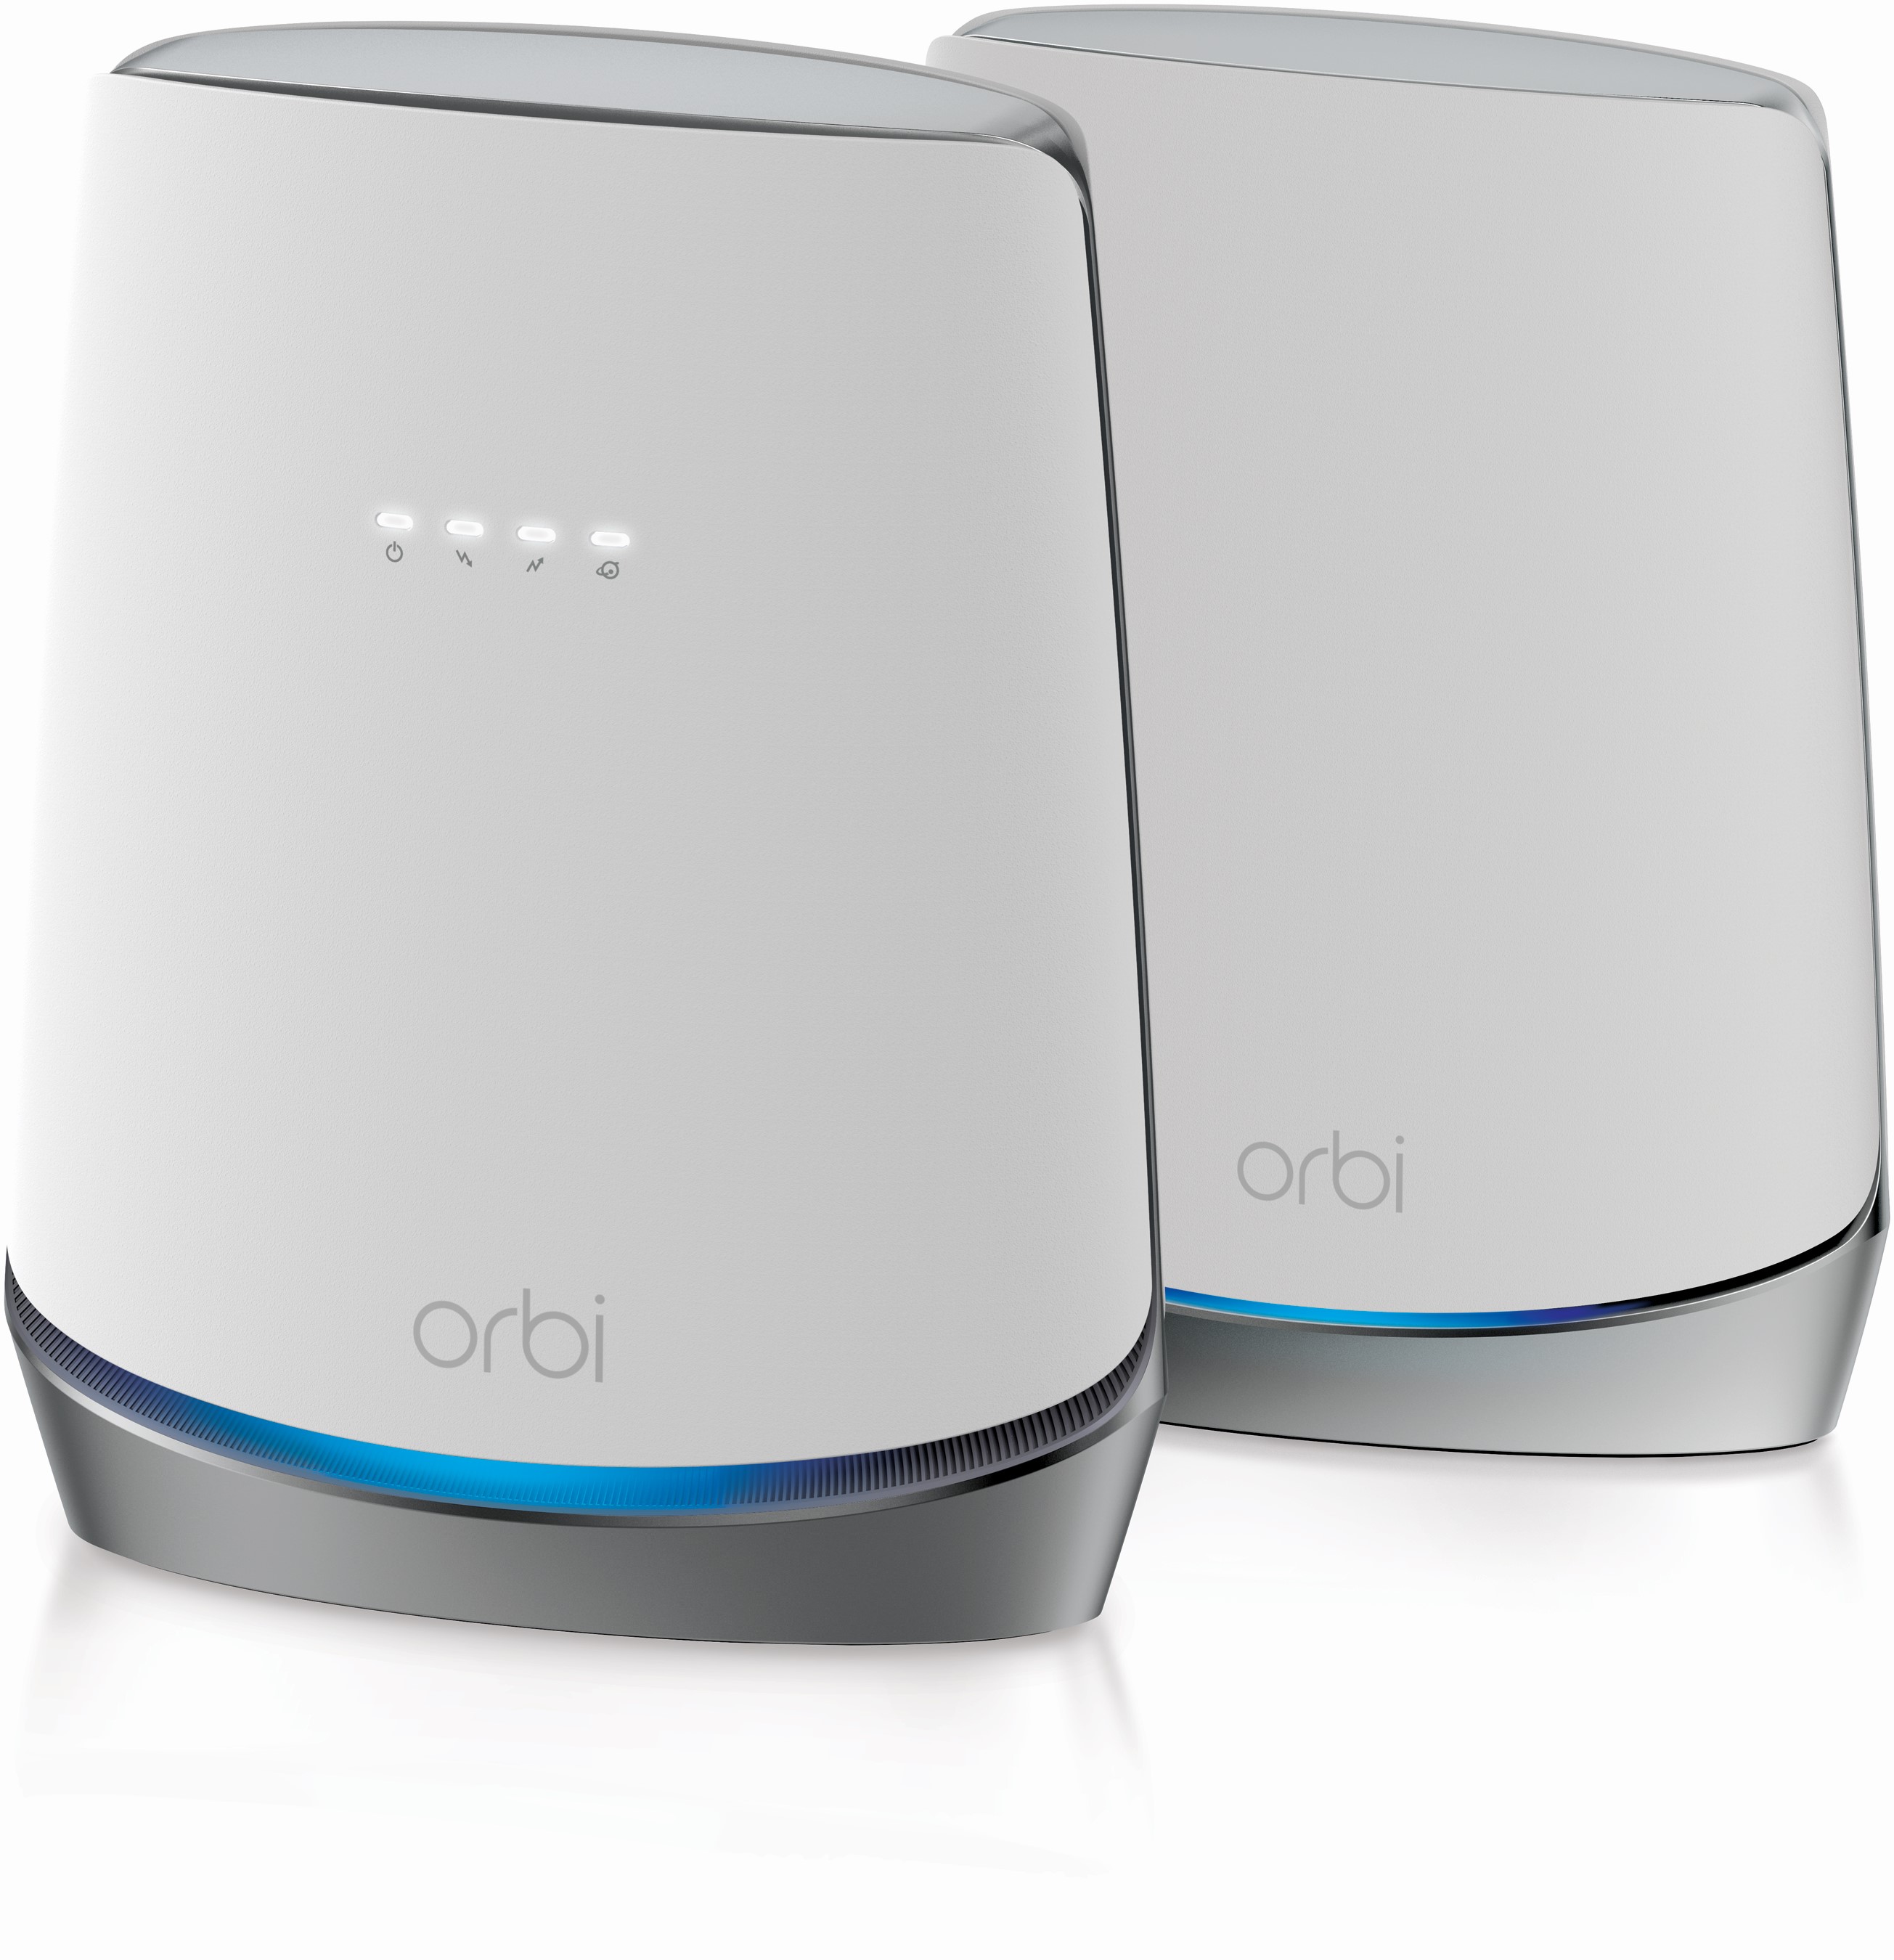 NETGEAR - Orbi AX4200 Tri-Band Mesh WiFi 6 System with DOCSIS 3.1 Cable Modem Router + 1 Satellite Extender, 4.2Gbps (CBK752) - image 1 of 6